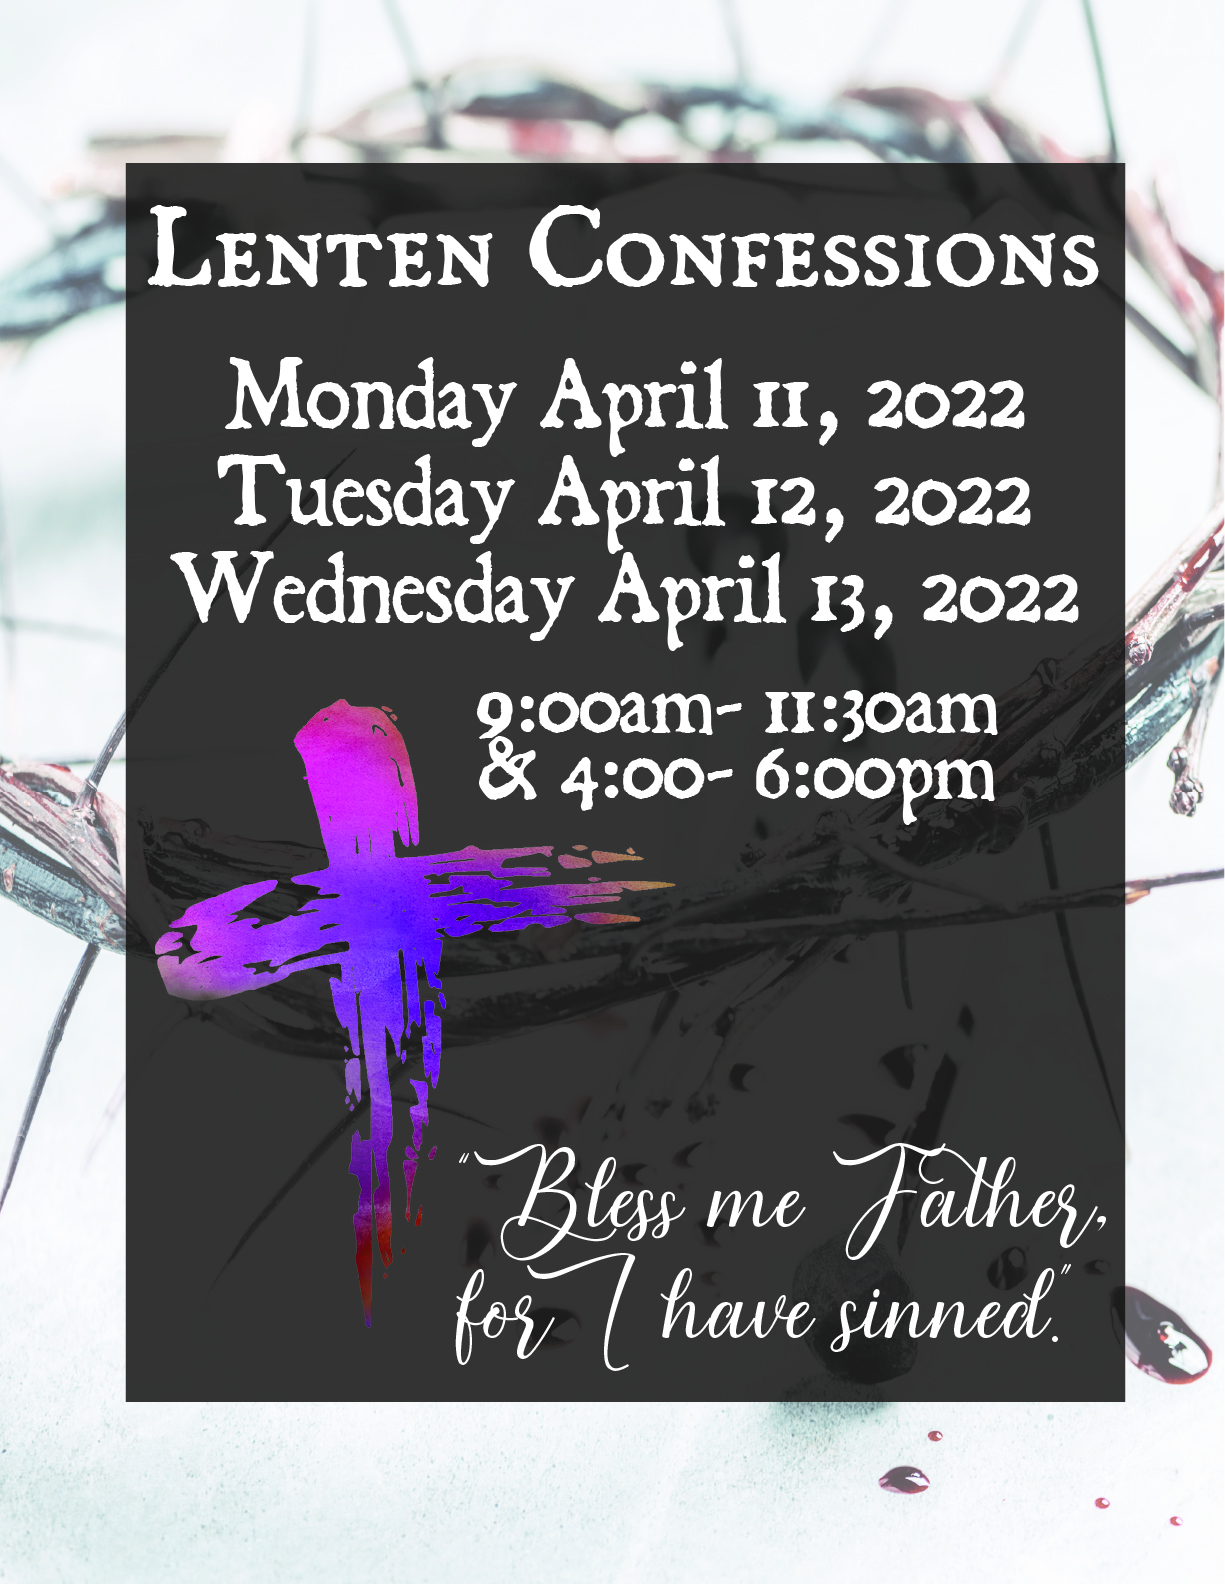 lenten confessions - Monday April 11, 2022, Tuesday April 12, 2022, Wednesday April 13, 2022 - 9:00am- 11:30am & 4:00- 6:00pm - 'Bless me Father, for I have sinned.'